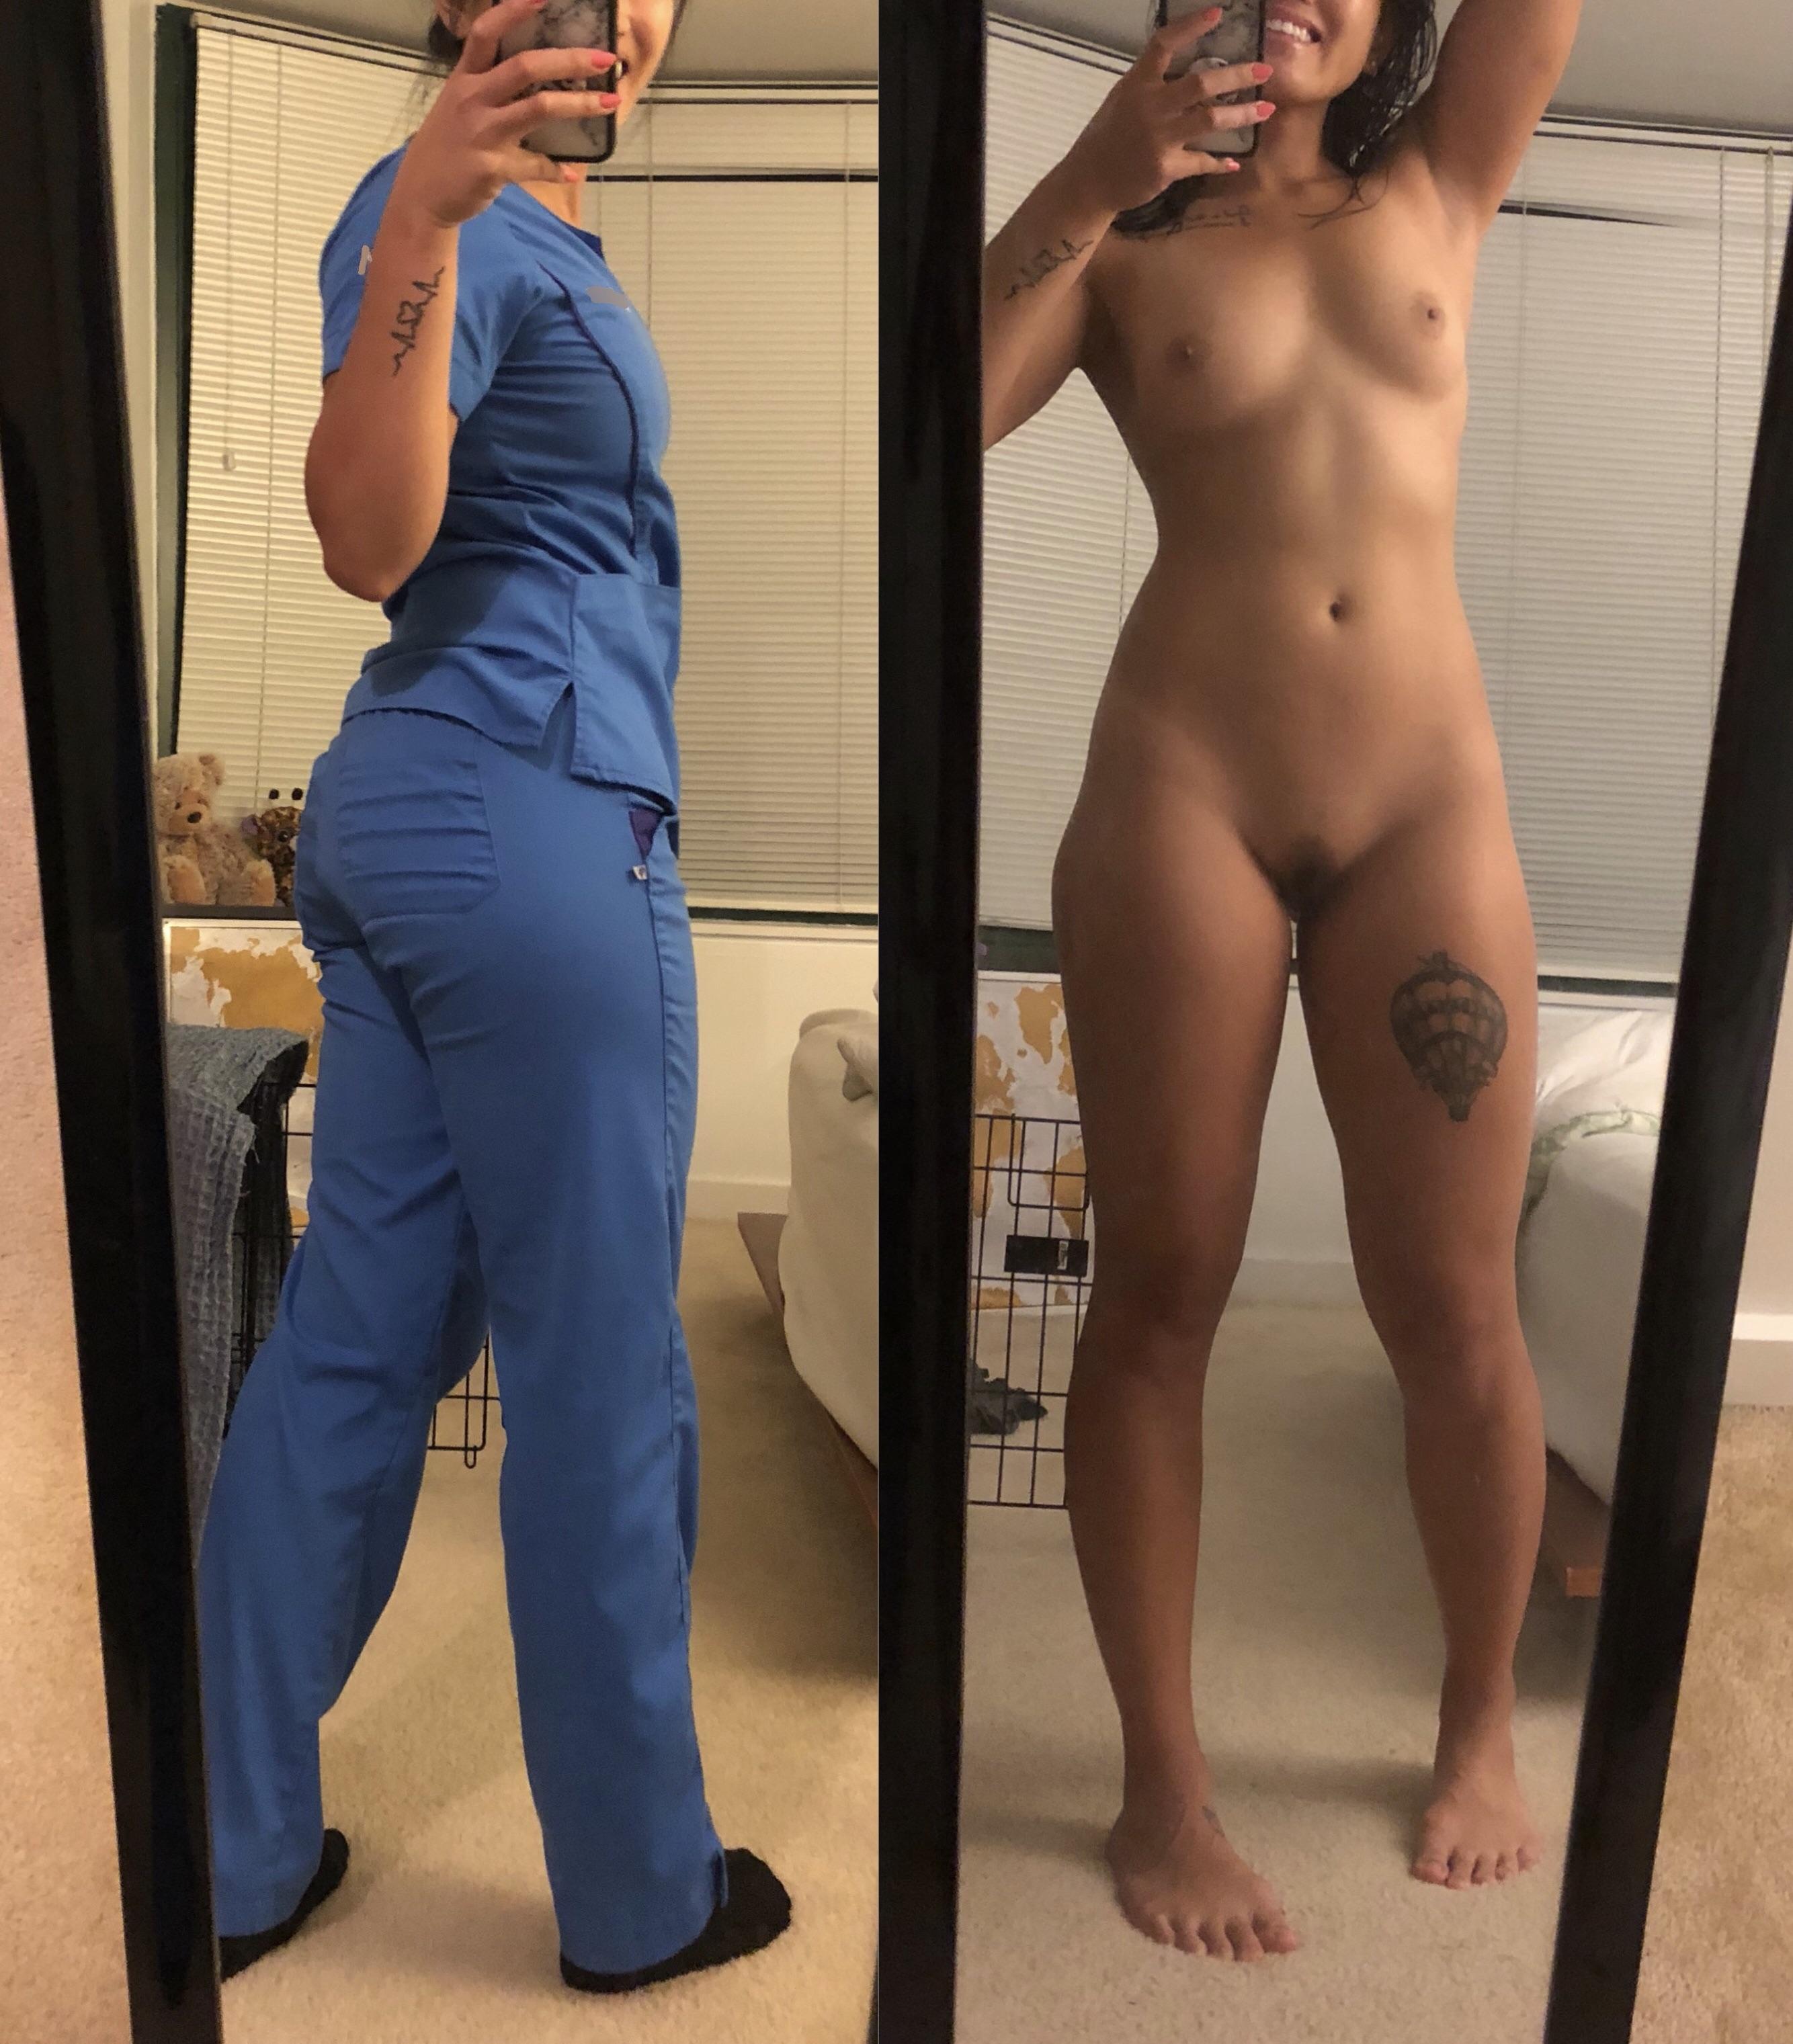 Love taking my scrubs off after a long shift